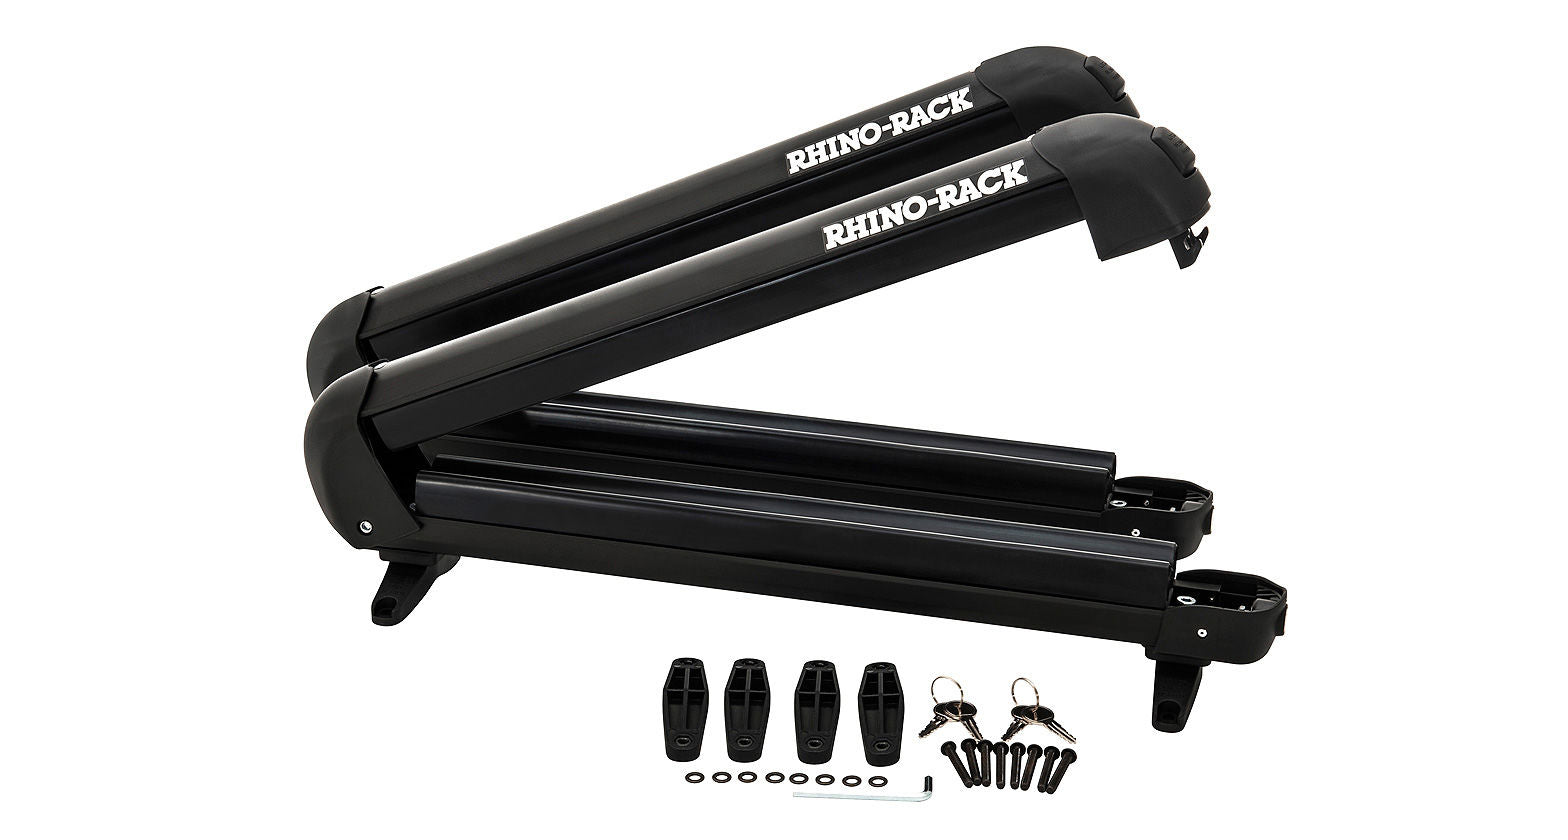 Rhino-Rack 574 - Ski and Snowboard Carrier - 4 Skis or 2 Snowboards